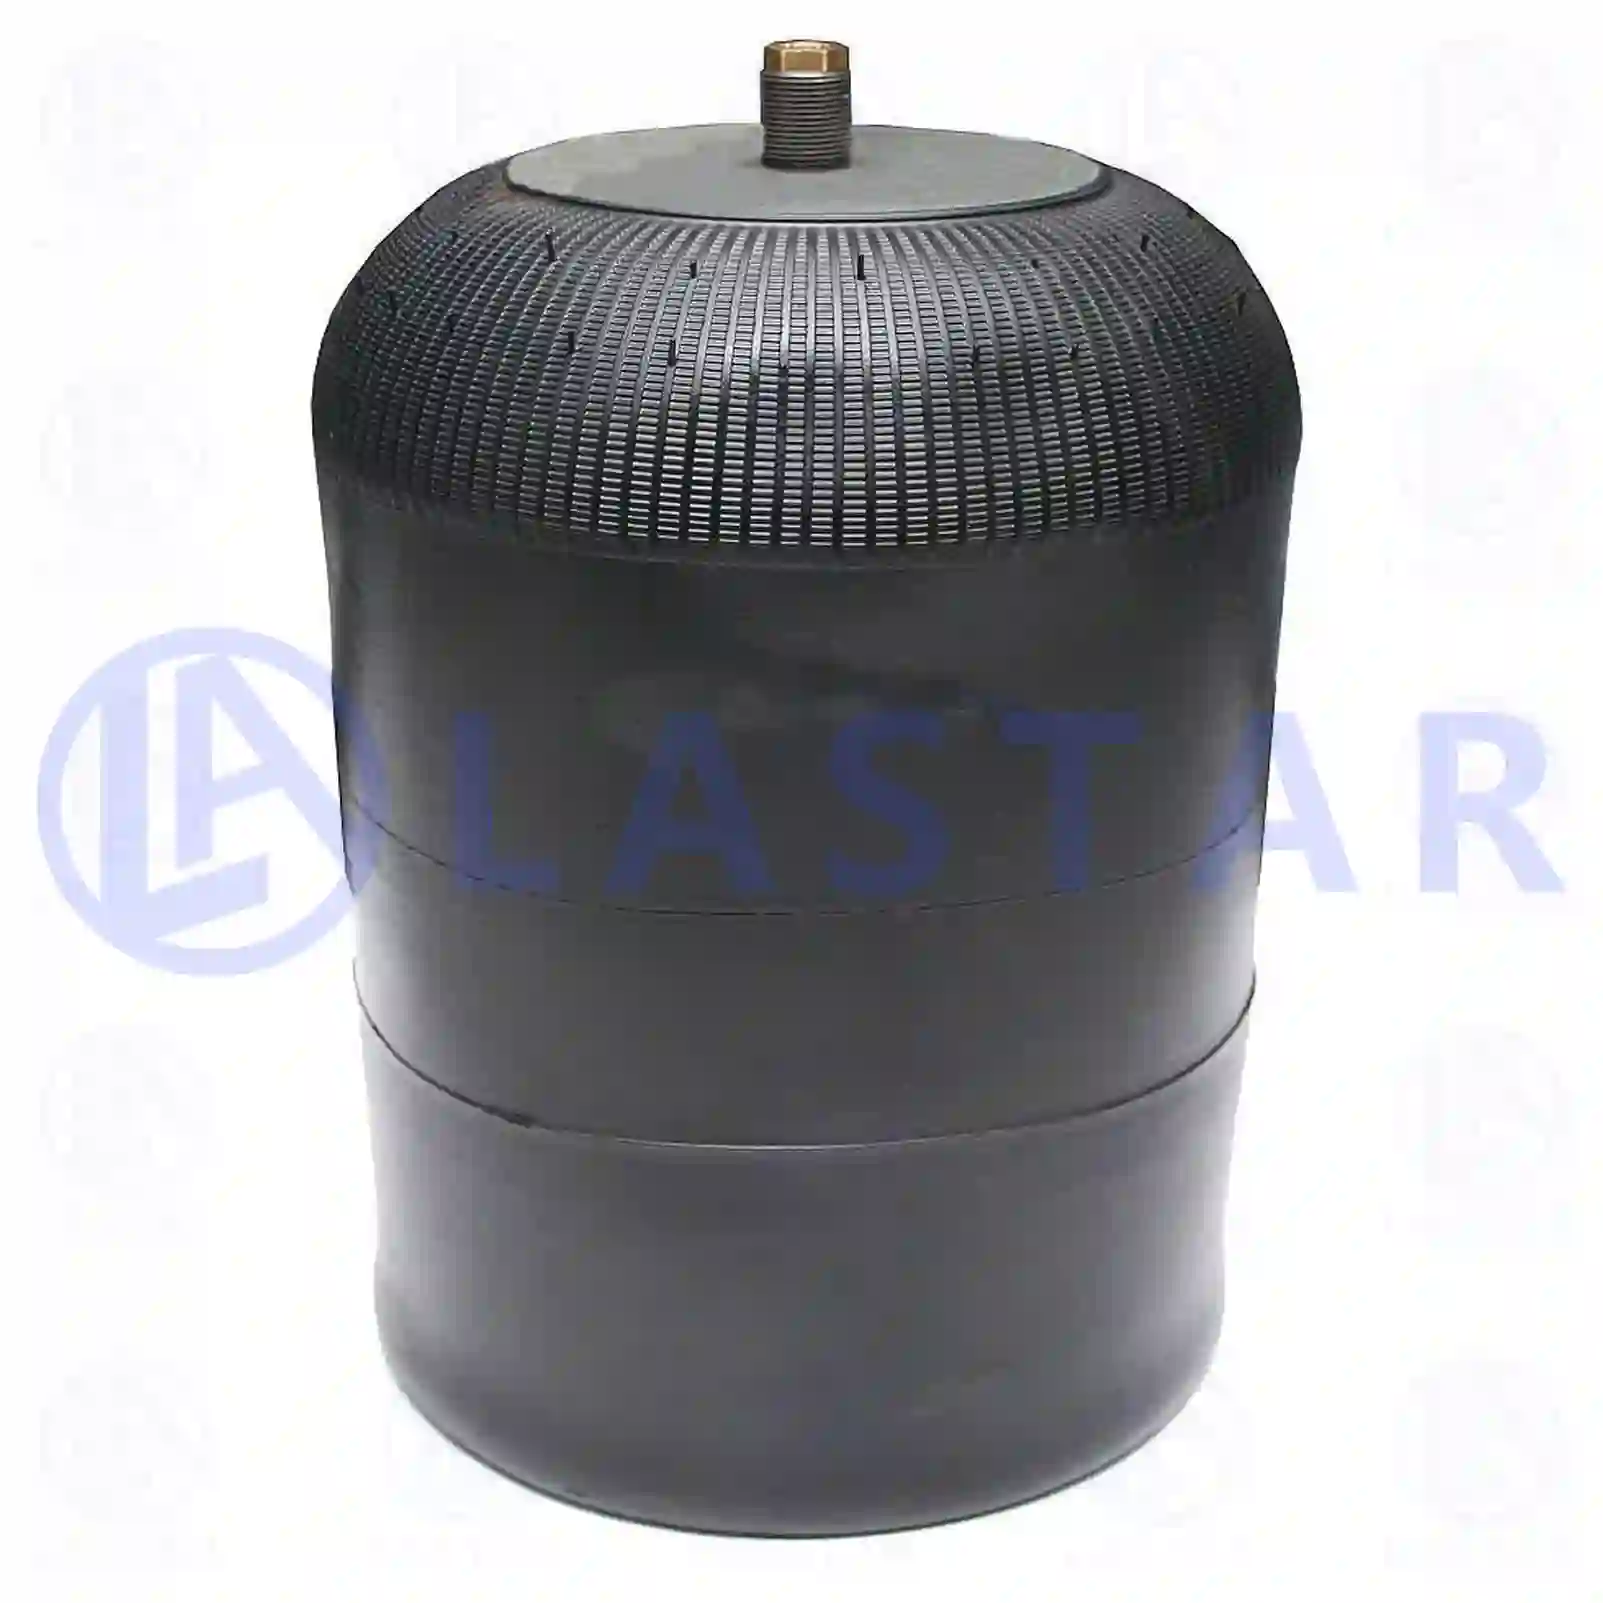 Air spring, with steel piston, 77728167, 3753200521, 9423203621, 9423203821, 9463200221, 9463200421 ||  77728167 Lastar Spare Part | Truck Spare Parts, Auotomotive Spare Parts Air spring, with steel piston, 77728167, 3753200521, 9423203621, 9423203821, 9463200221, 9463200421 ||  77728167 Lastar Spare Part | Truck Spare Parts, Auotomotive Spare Parts